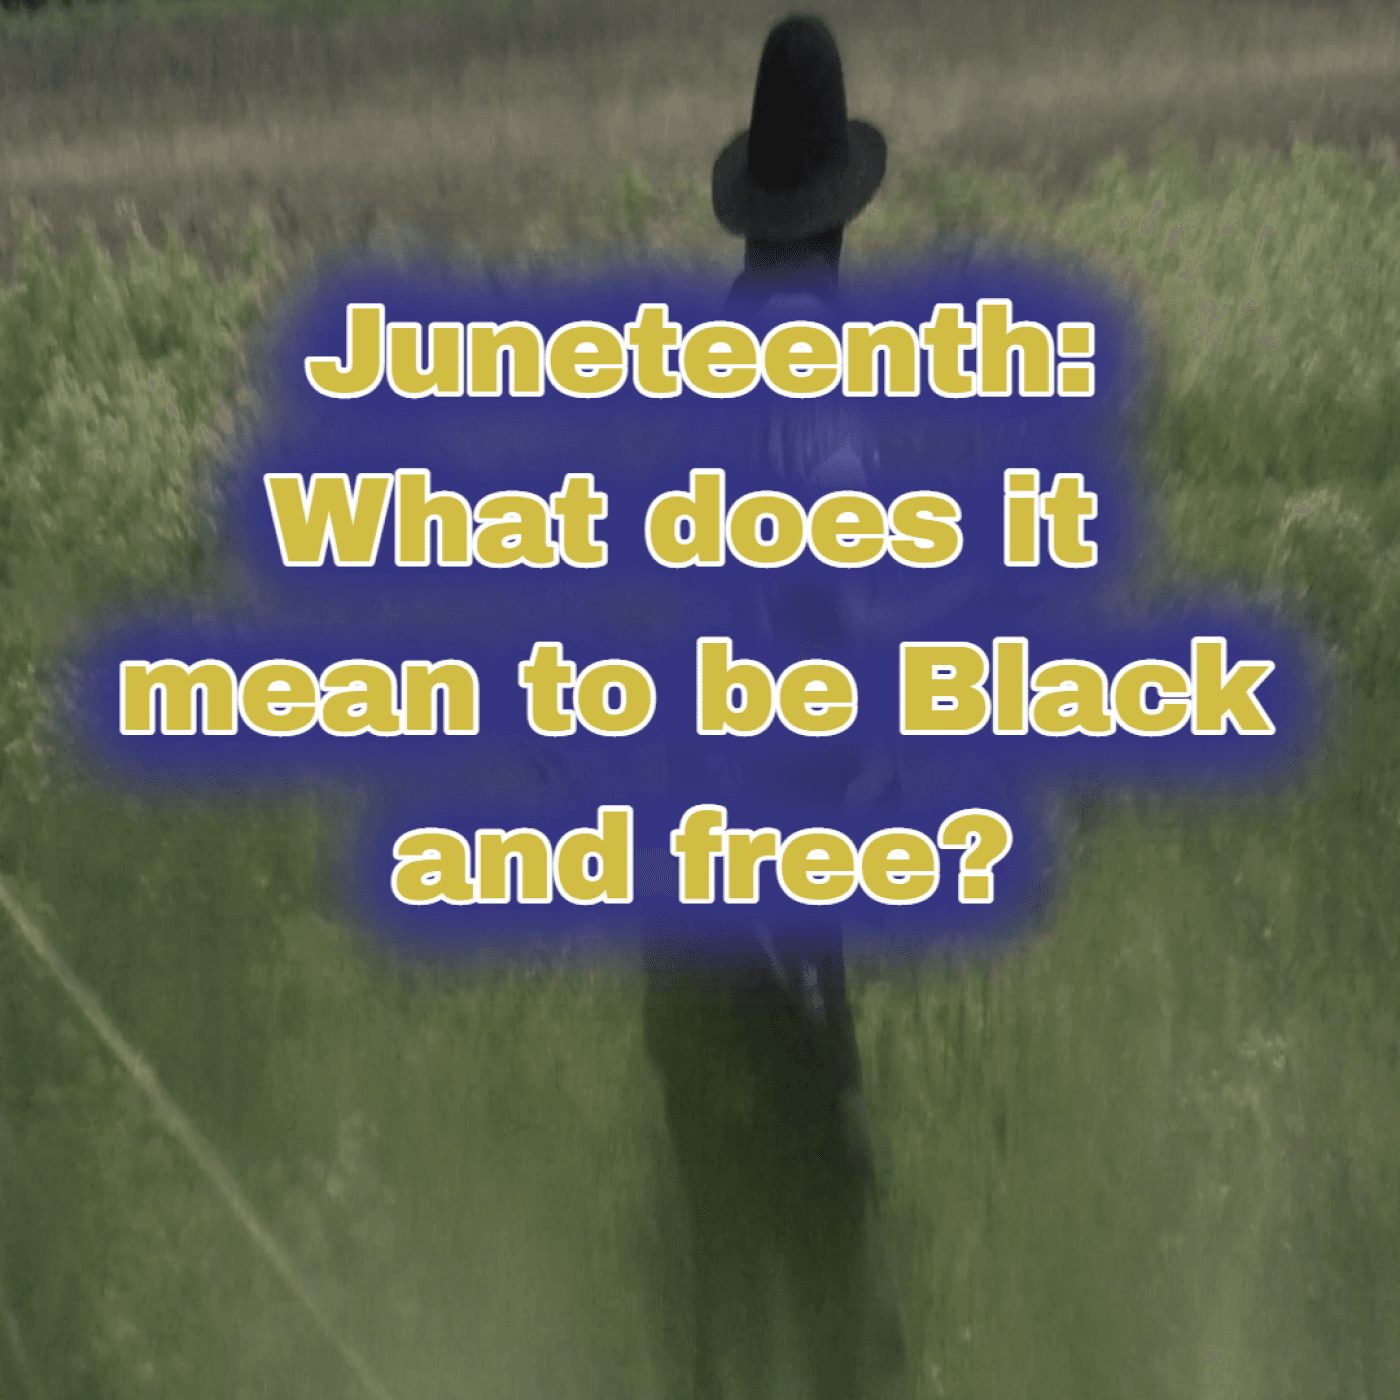 Thumbnail for "What Does It Mean to be Black and Free?".